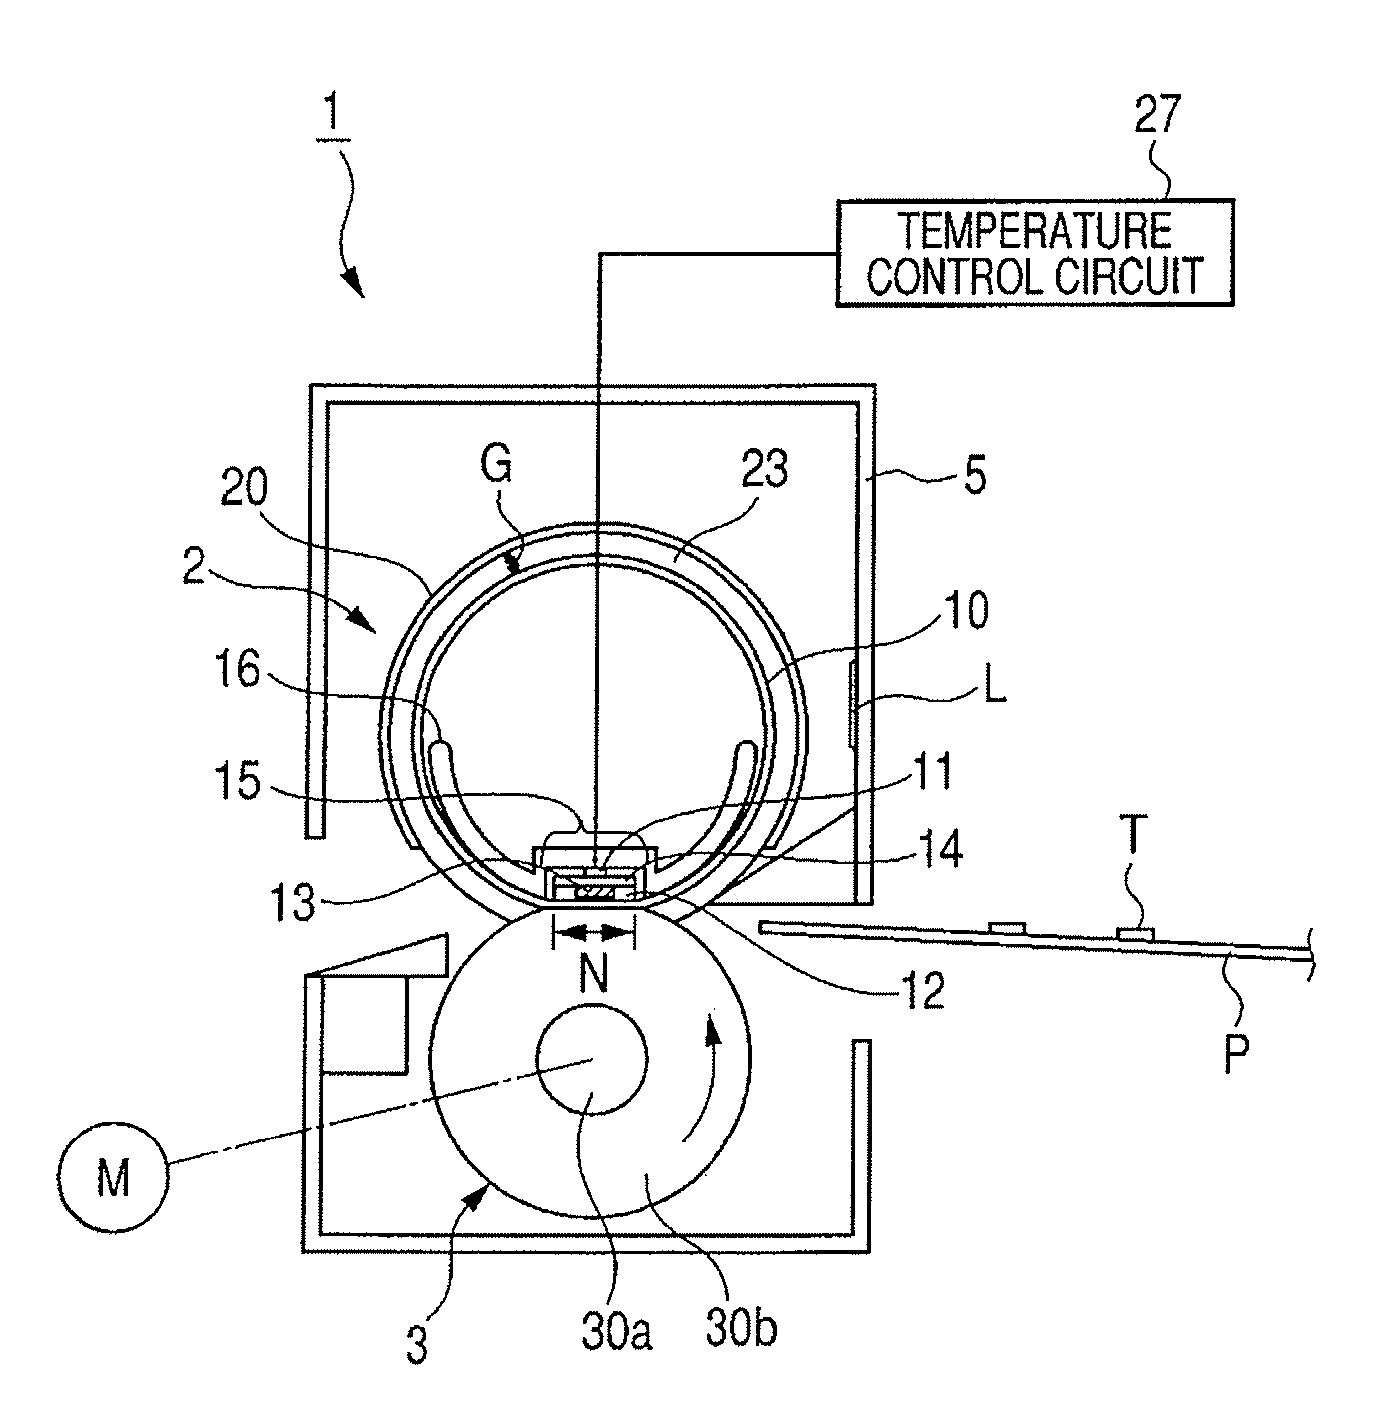 Image heating apparatus with frame accommodating apparatus components